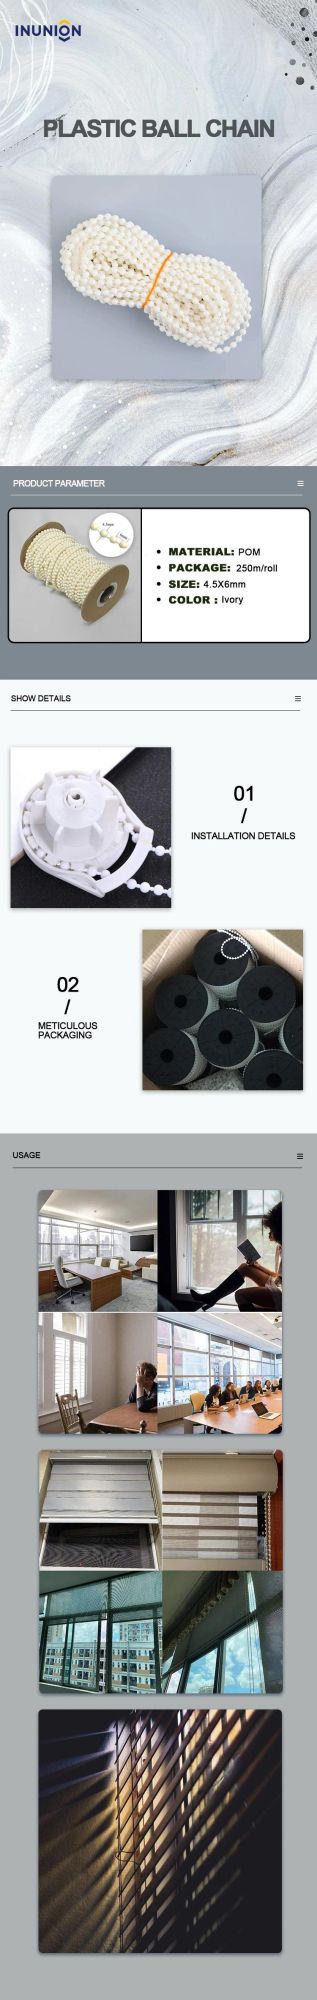 Chains Plastic Chain Ball 4.5mm Roller Blinds Chains Plastic Chain Plastic Ball Chain